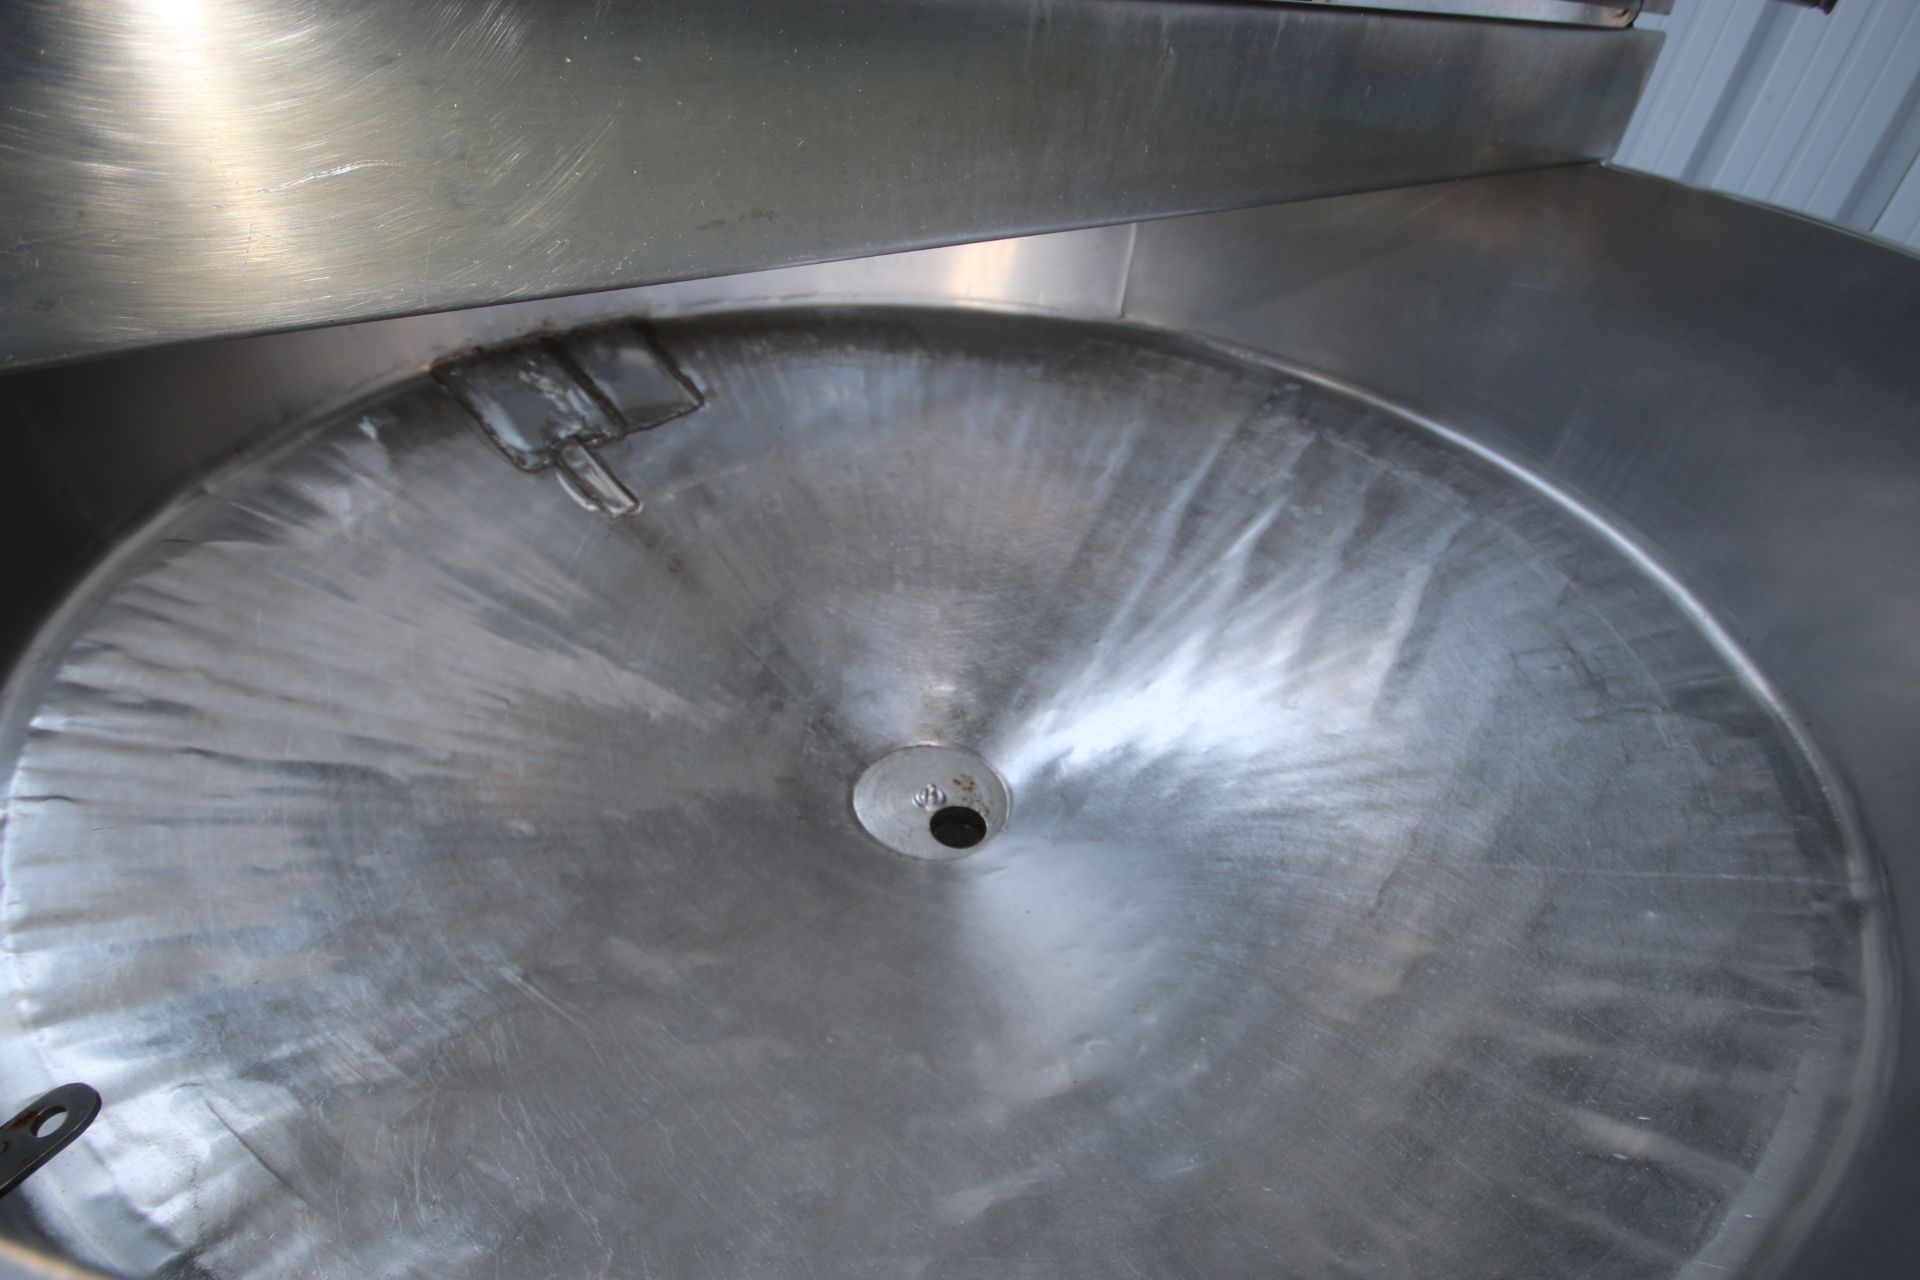 S/S Cone-Bottom Jacketed Kettle, Aprox. 70" Dia. x 16" Deep, with Agitation Motor, (2) S/S Hinge - Image 3 of 5